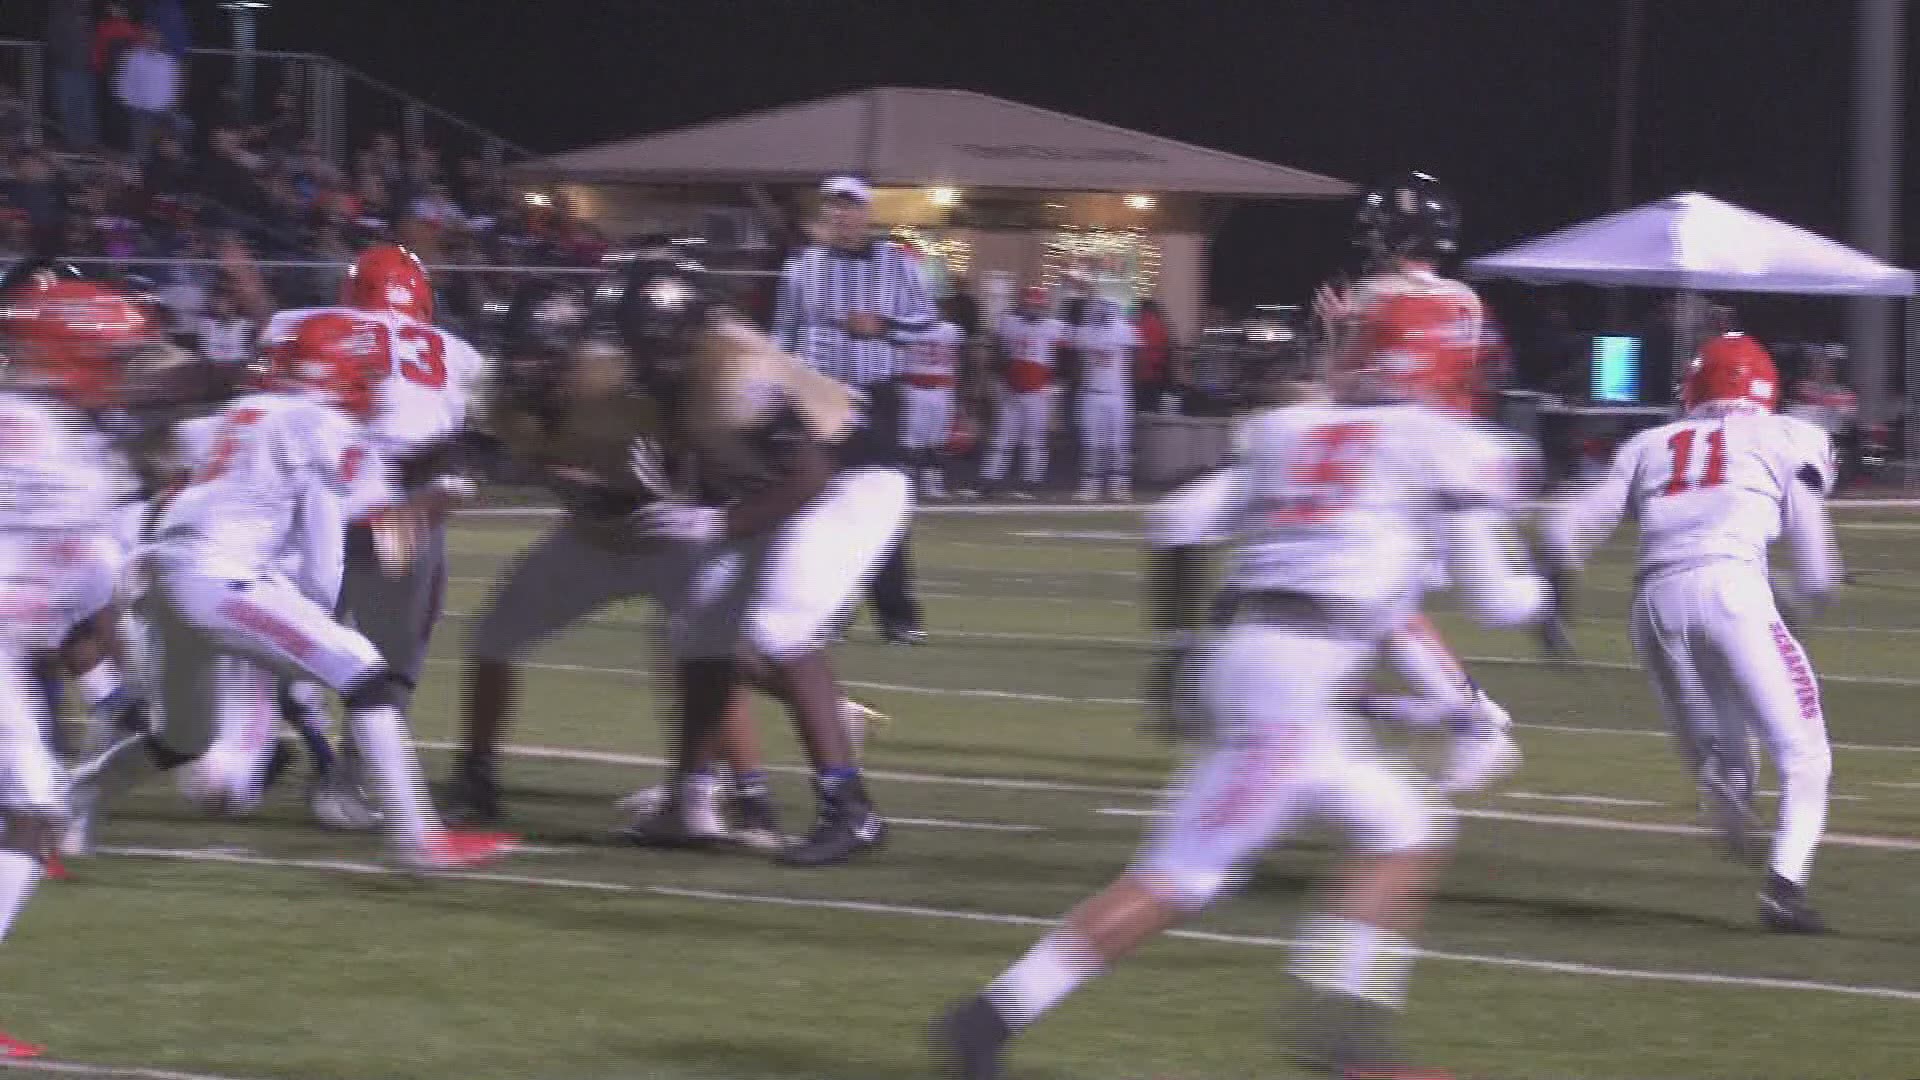 Vote for Yarnell's Sweetest Play of the week for week six!